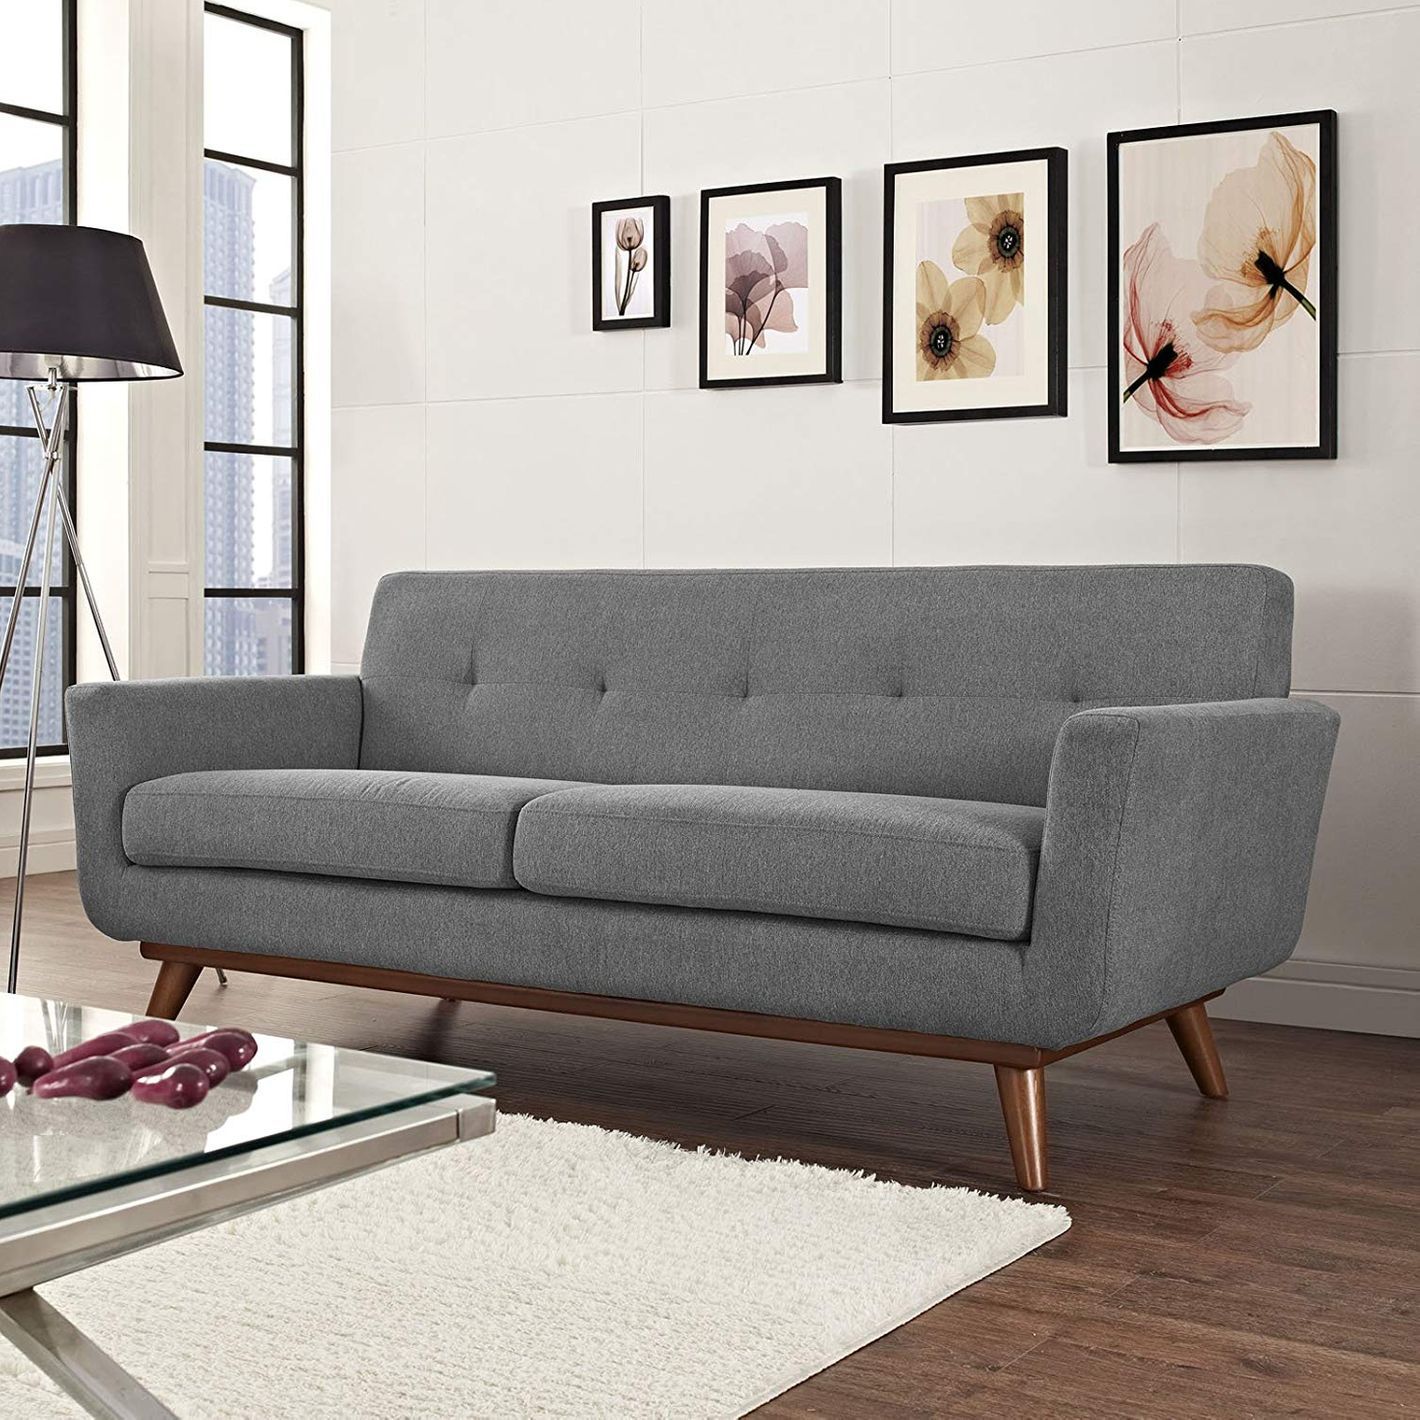 8 Best Love Seats 2021 | The Strategist Pertaining To Modern Loveseat Sofas (View 3 of 15)